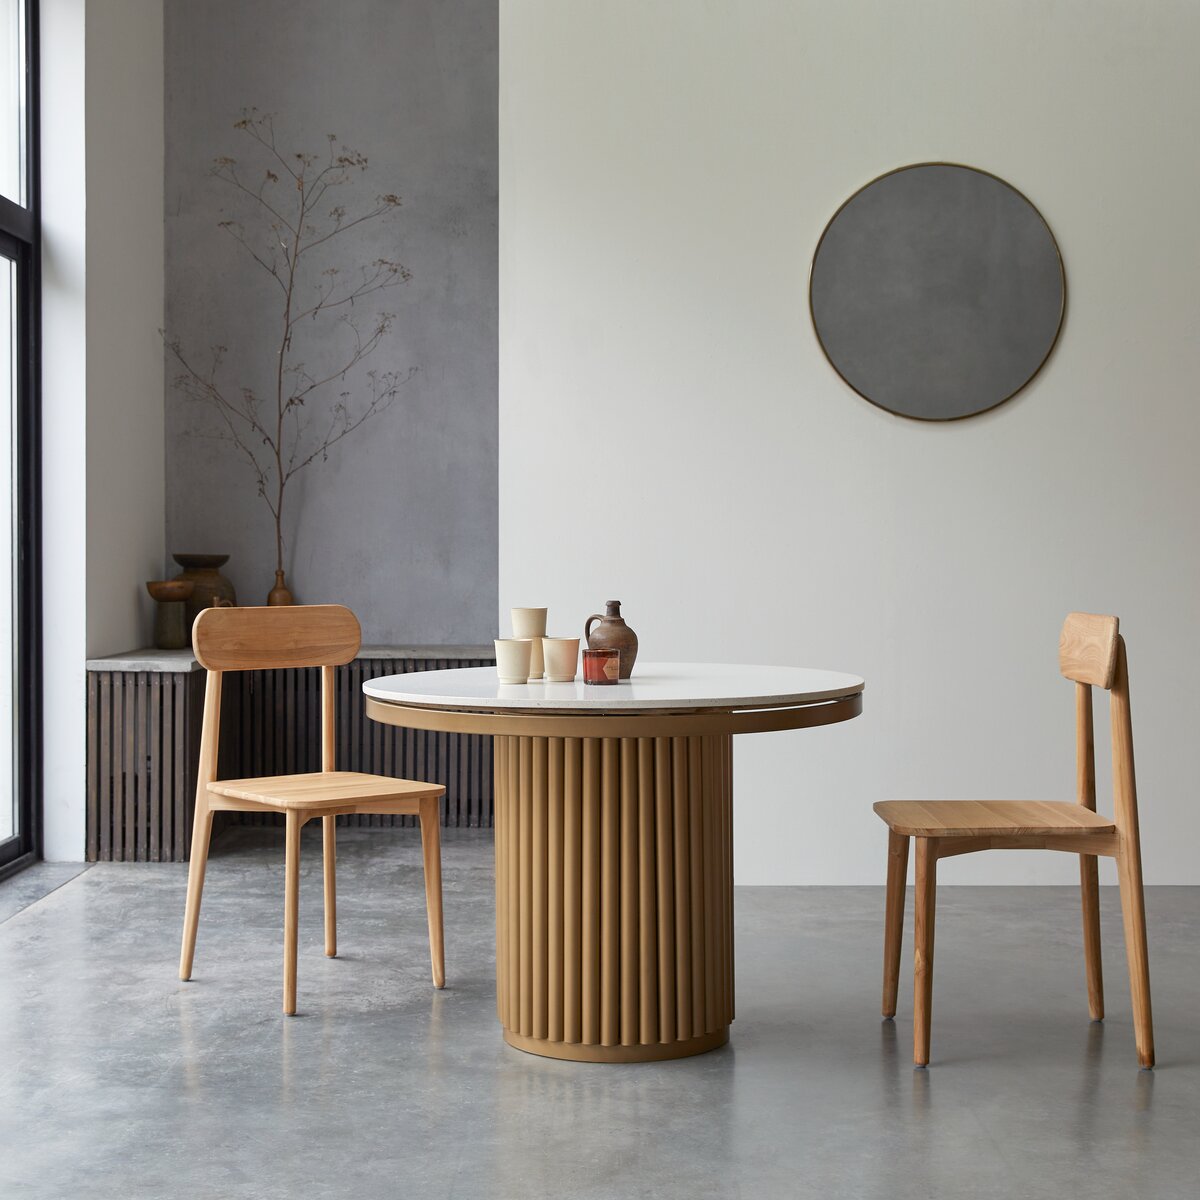 Isaure - Round table in metal and terrazzo